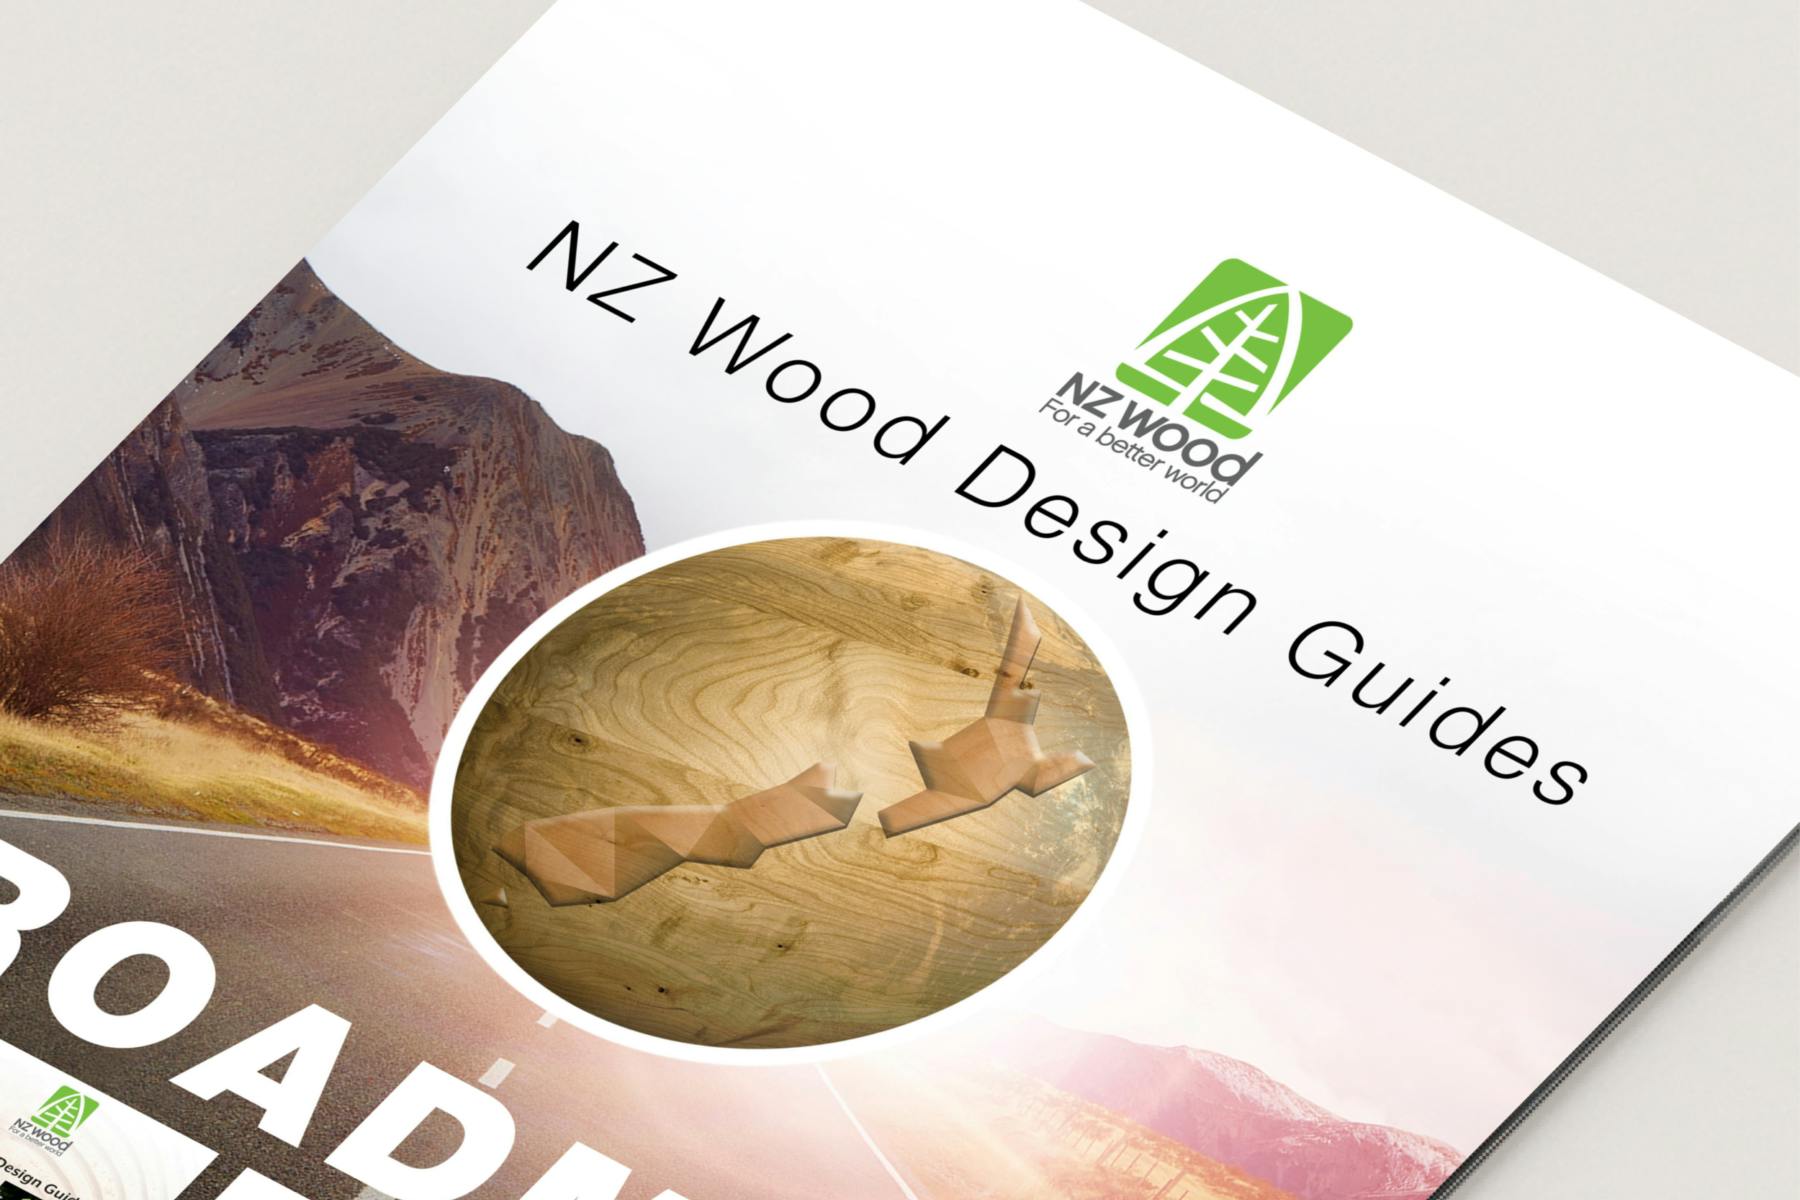 Missing NZWG site graphics